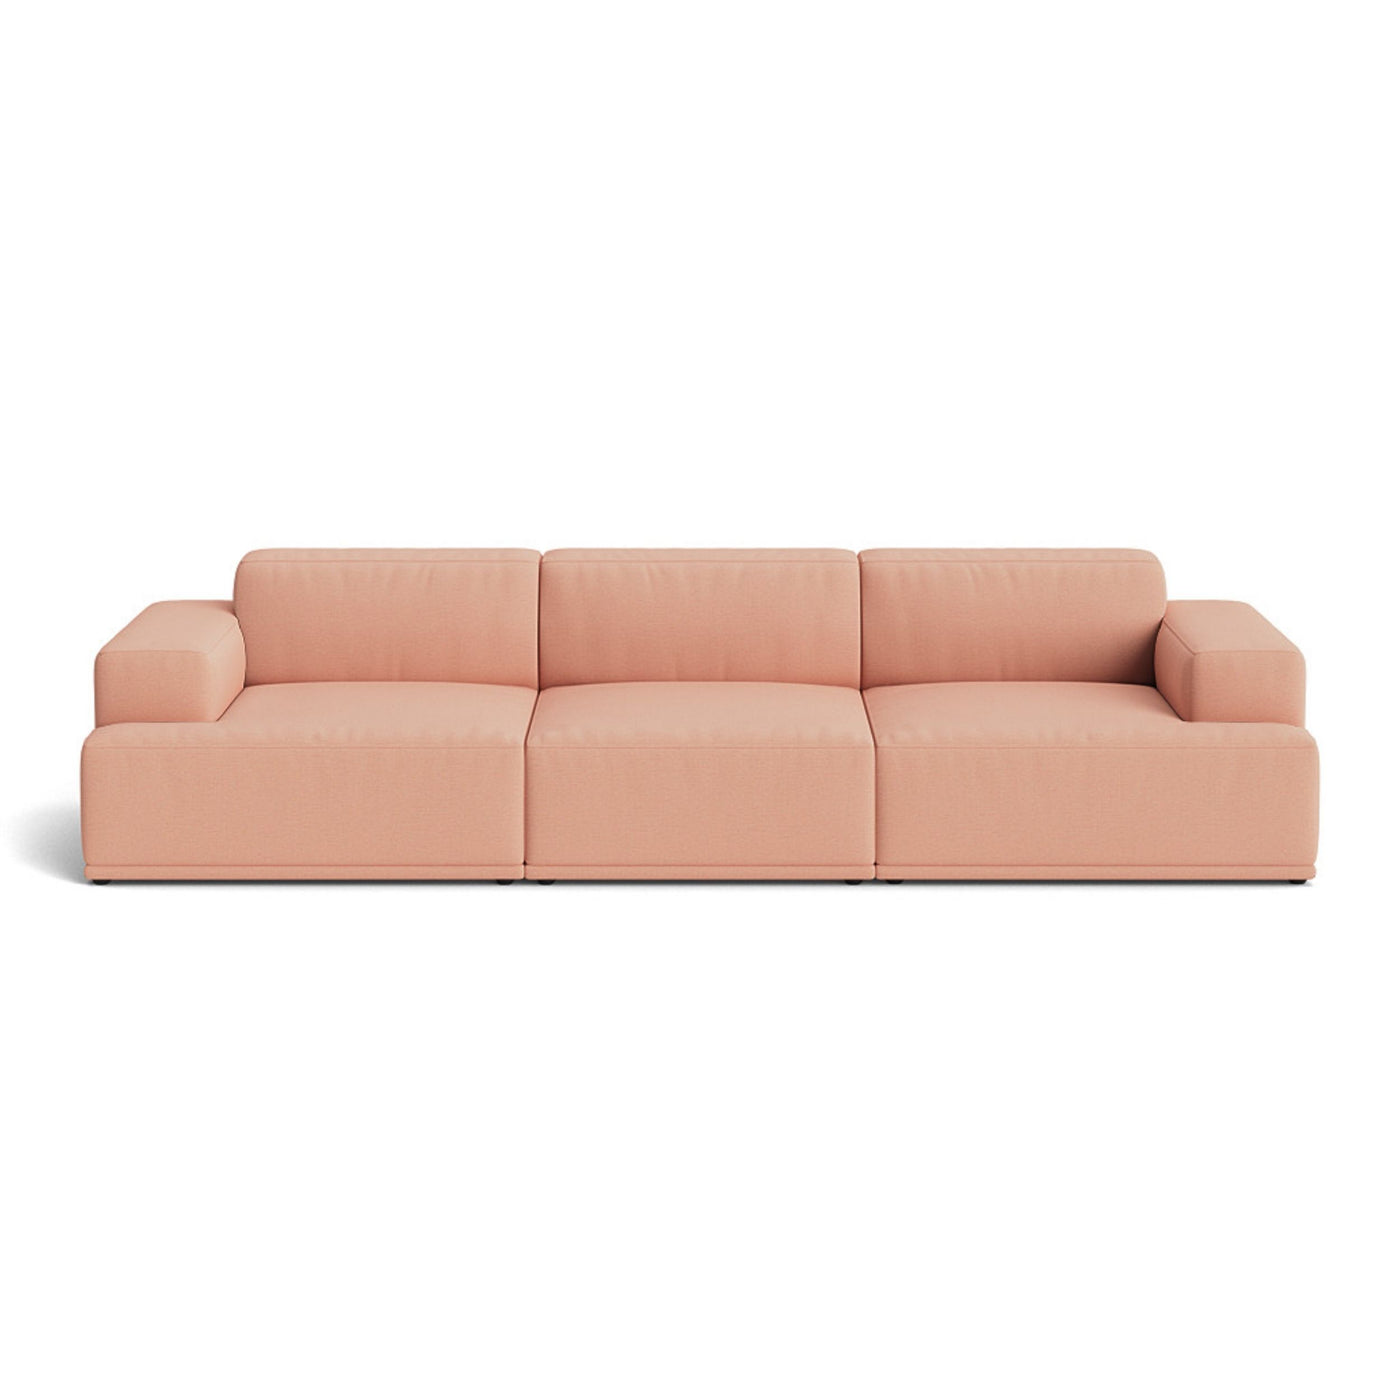 Muuto Connect Soft Modular 3 Seater Sofa, configuration 1. Made-to-order from someday designs. #colour_steelcut-trio-515